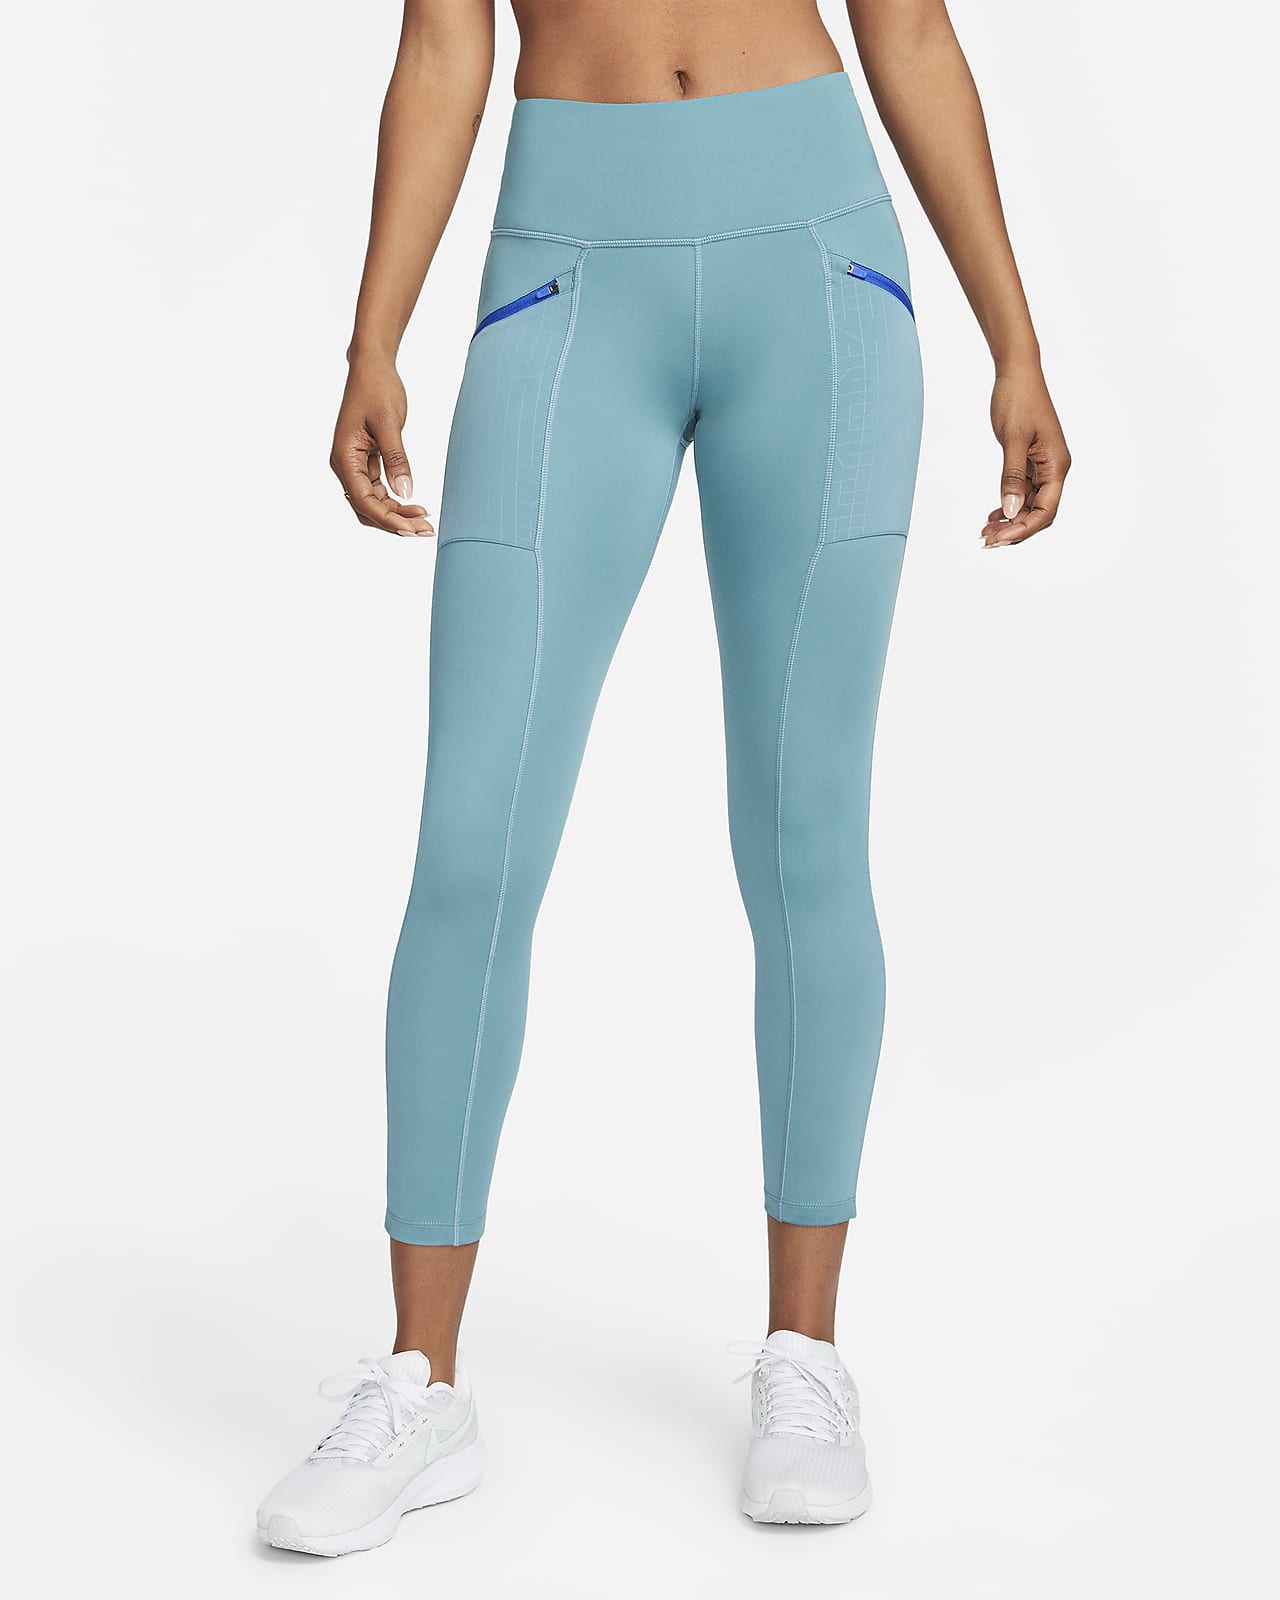 Edition Indeholde høste Nike Fast Women's Mid-Rise 7/8 Running Leggings with Pockets. Nike SK